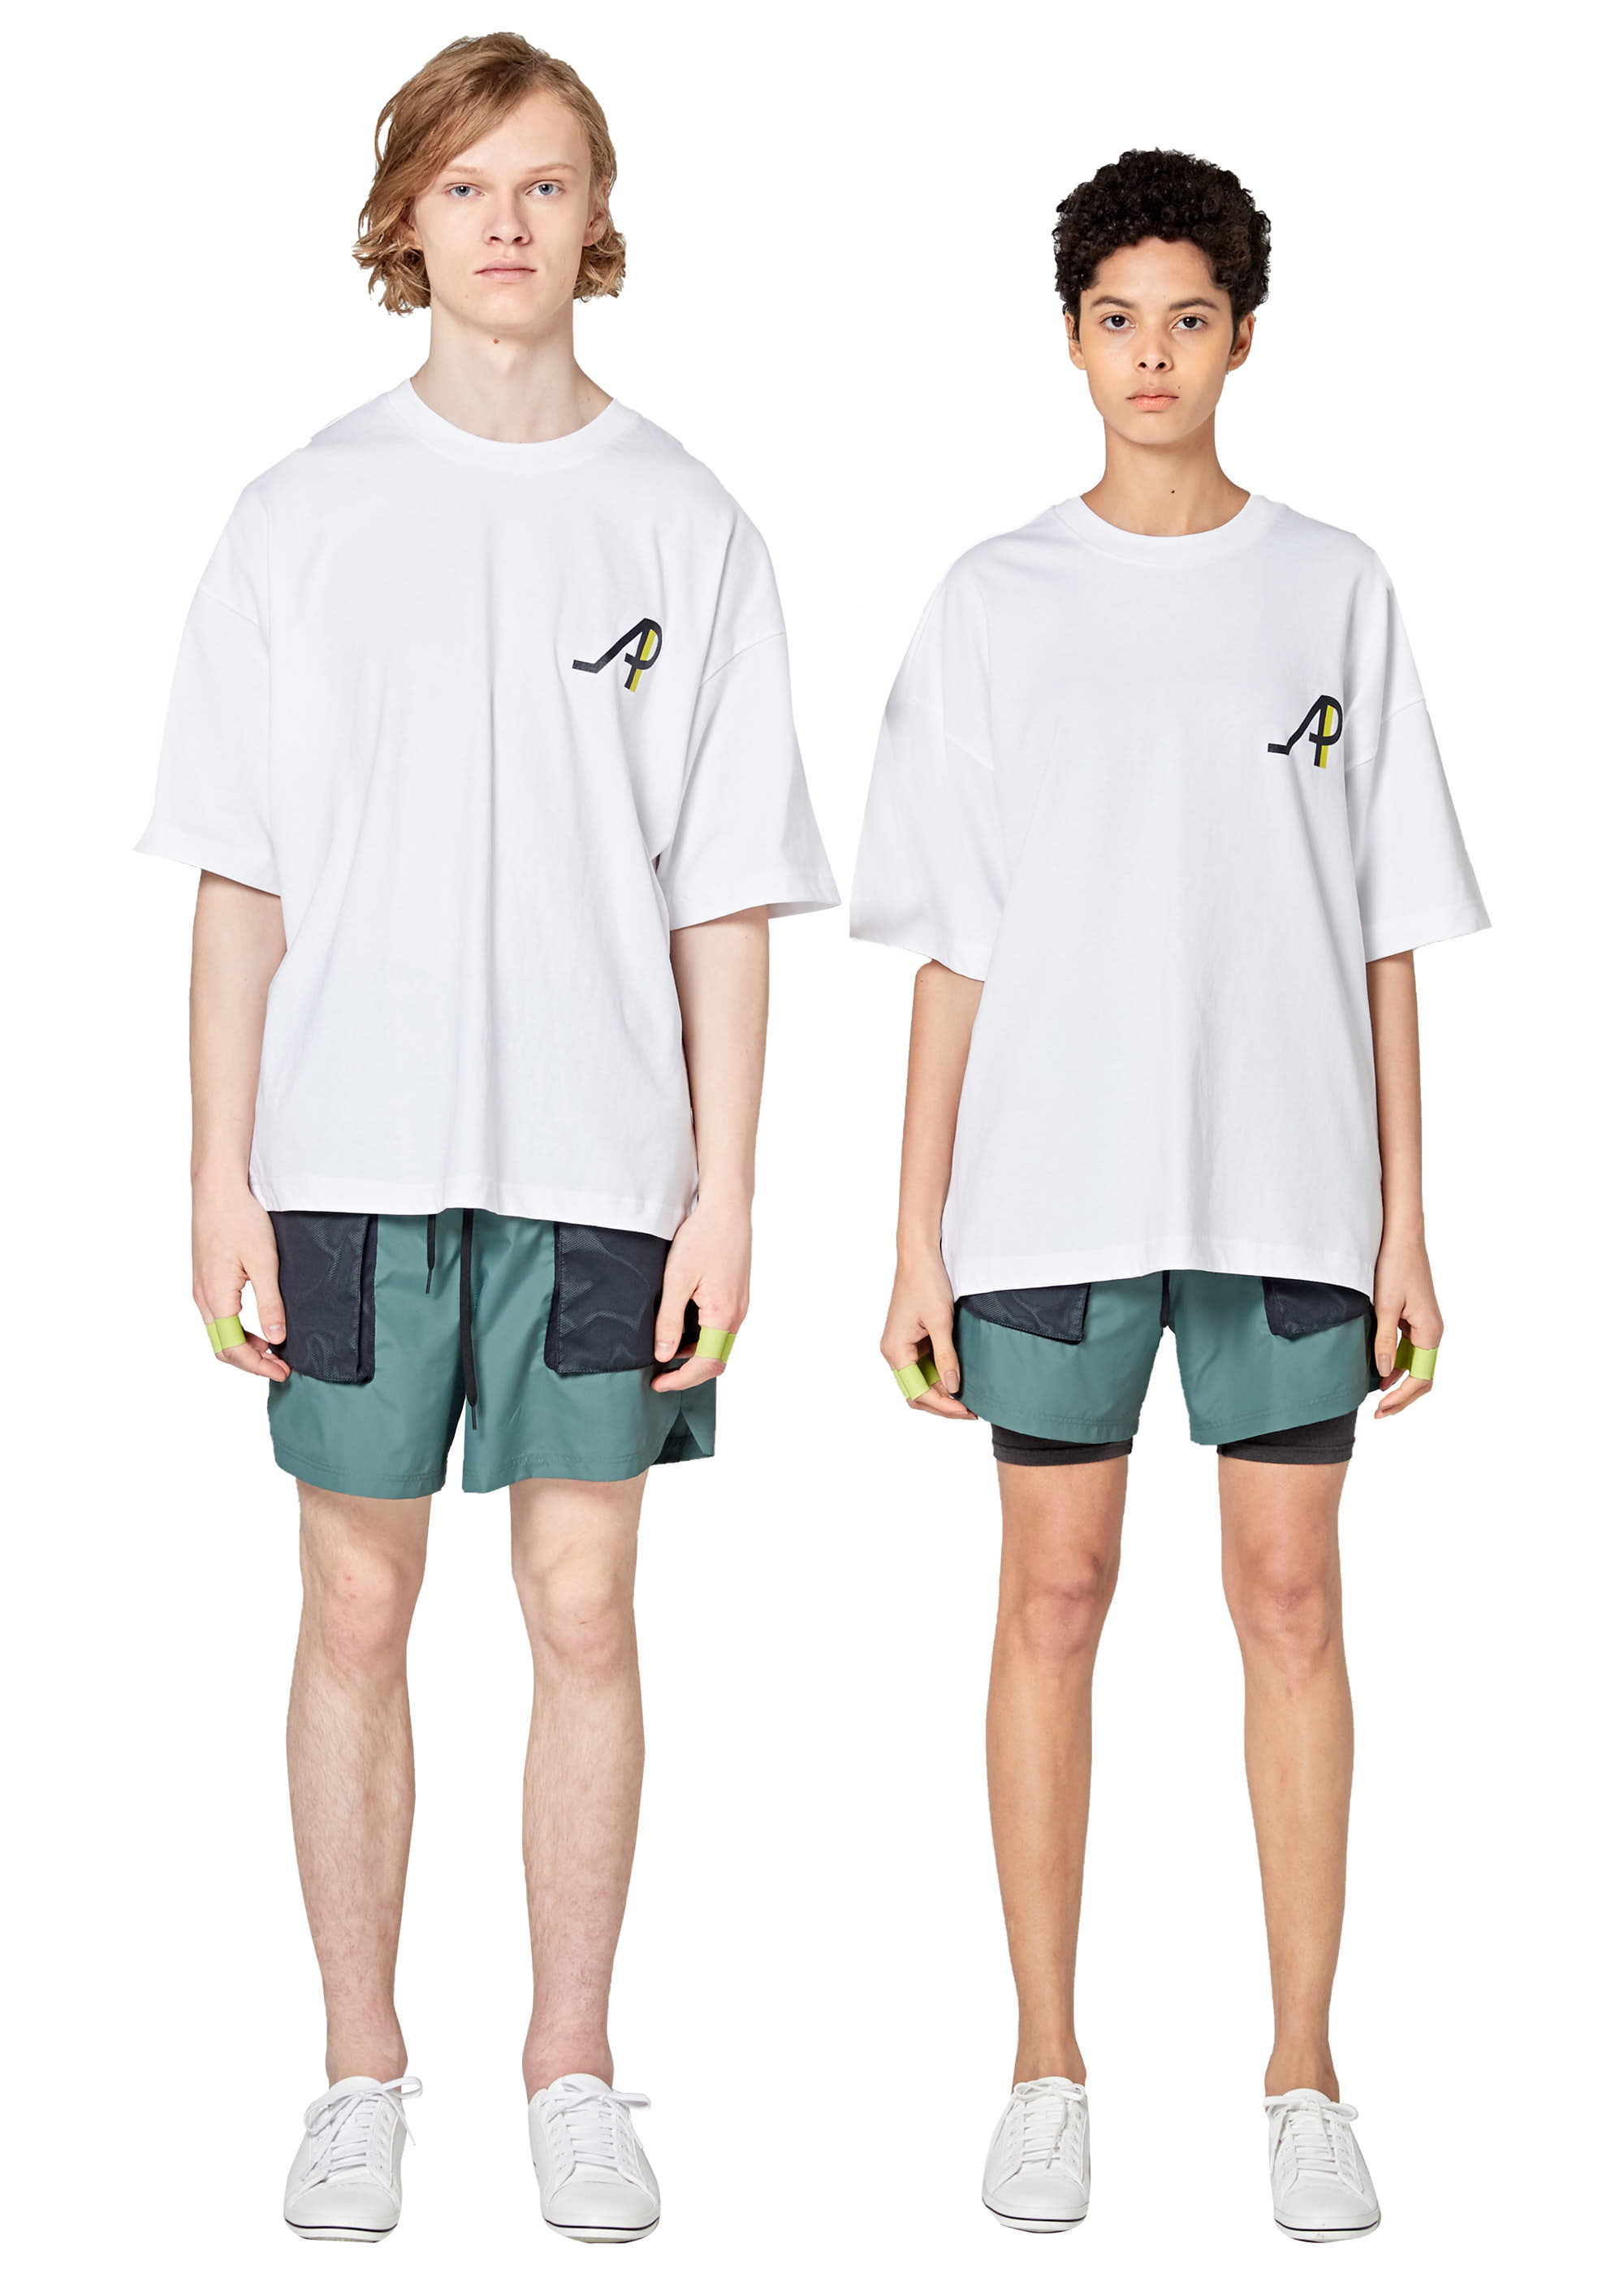 AM01PS022 in 1 BAND RUNNING SHORTS_GREEN